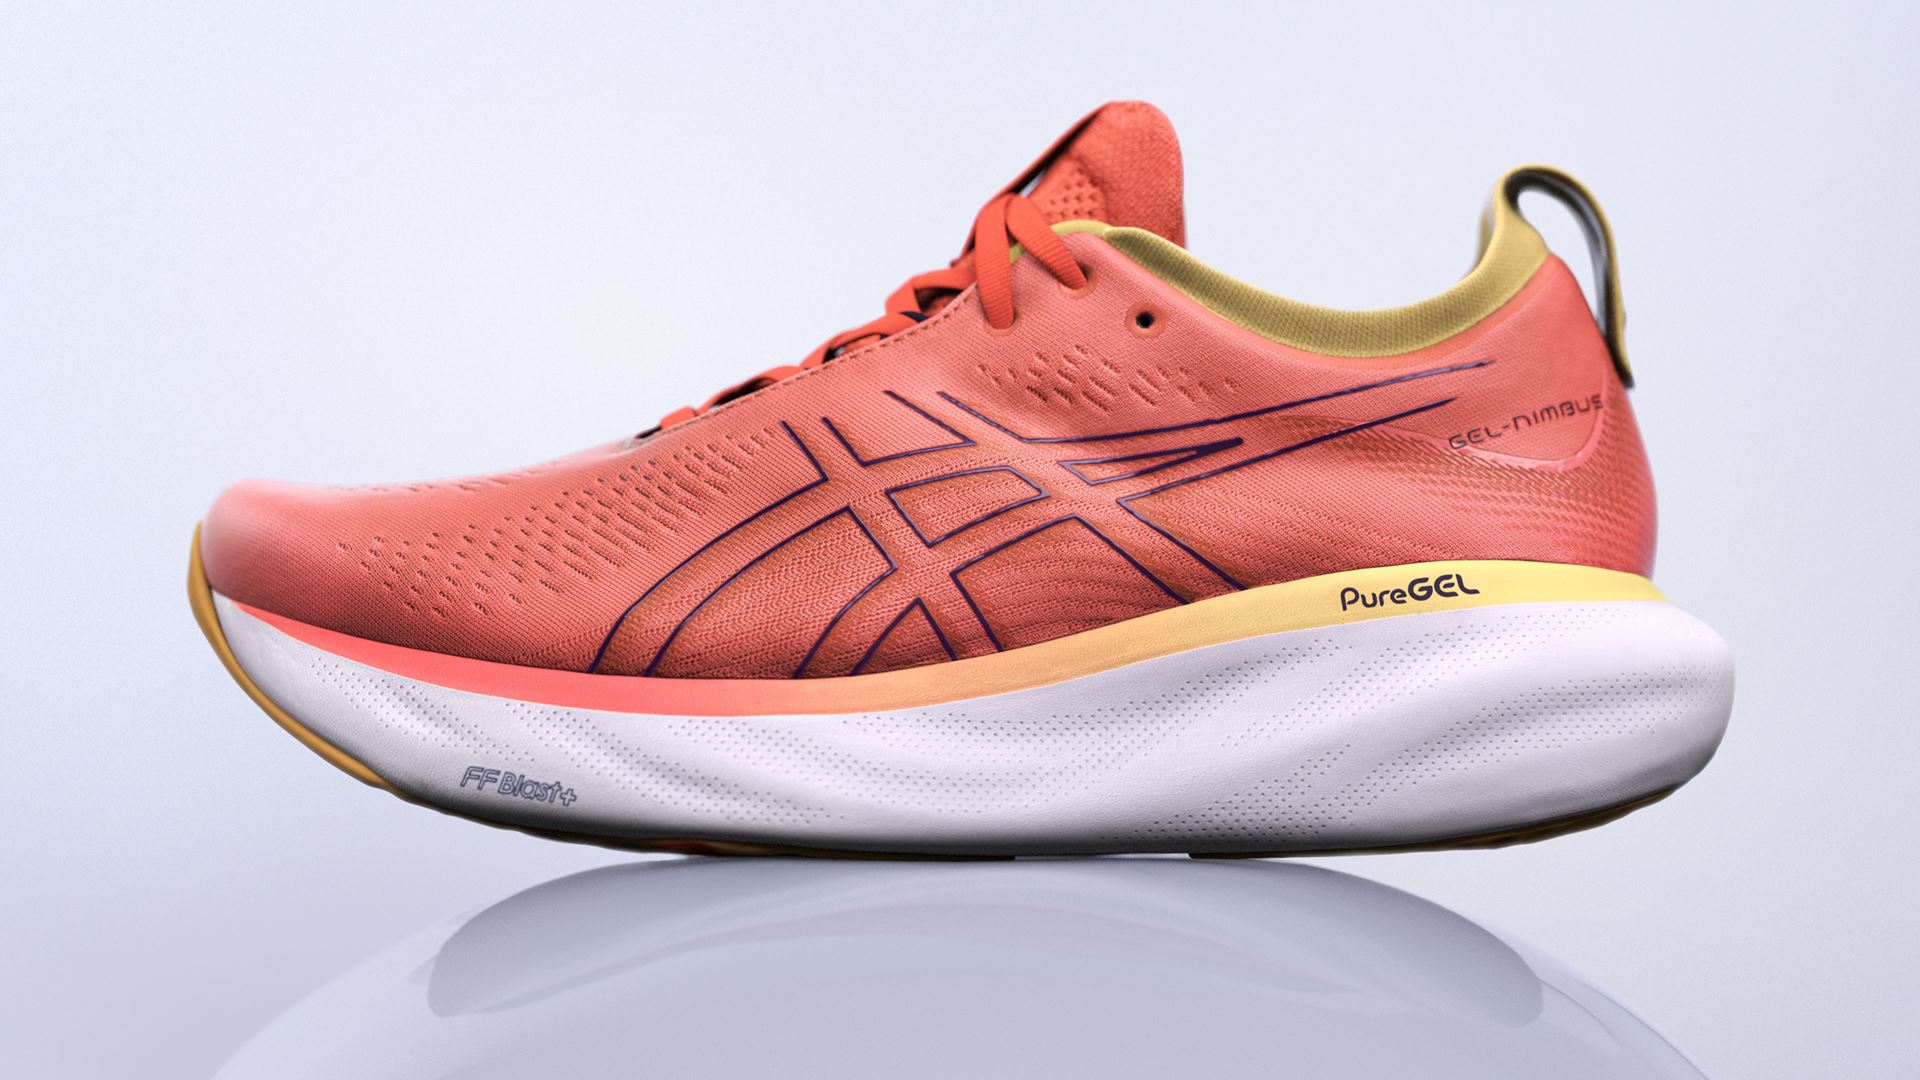 ASICS launches the GEL-NIMBUS™ 25, the most comfortable running shoes as tested by runners*